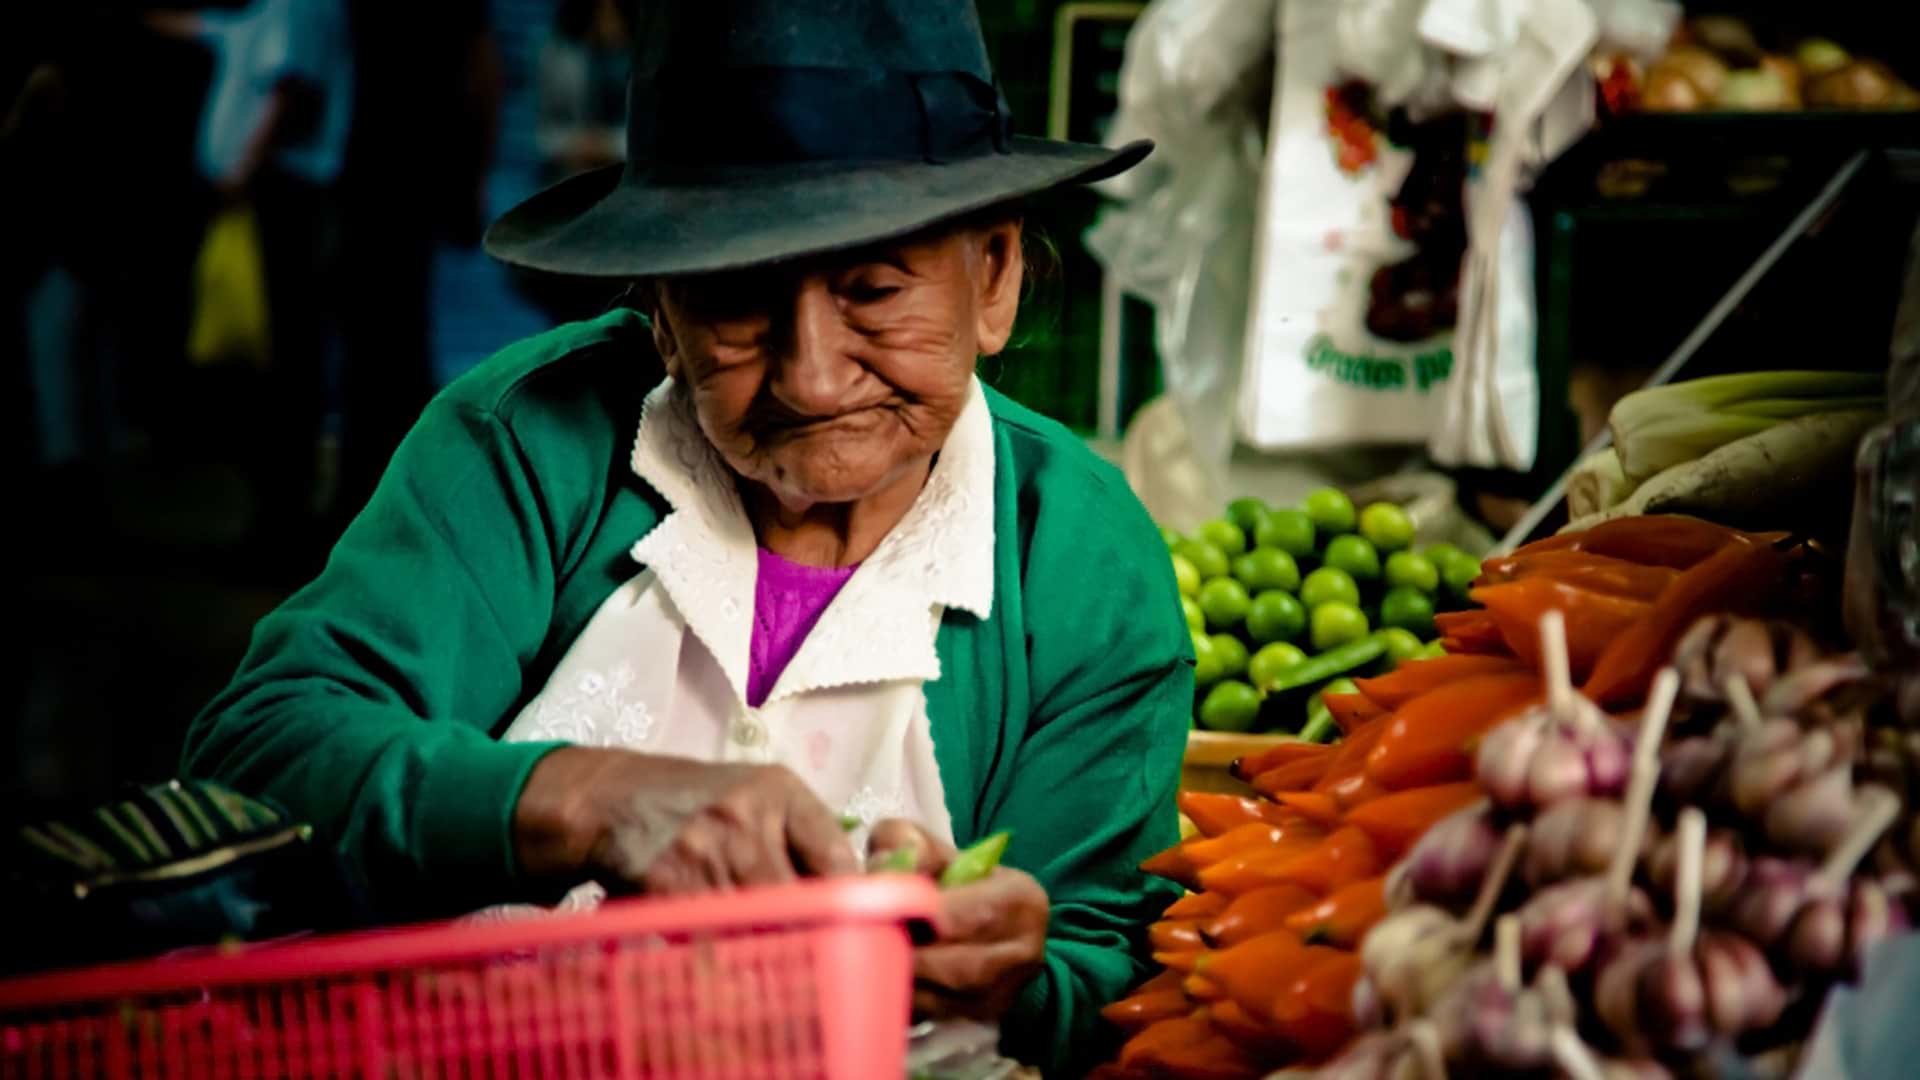 11Old lady of a market stall | Responsible Travel Peru